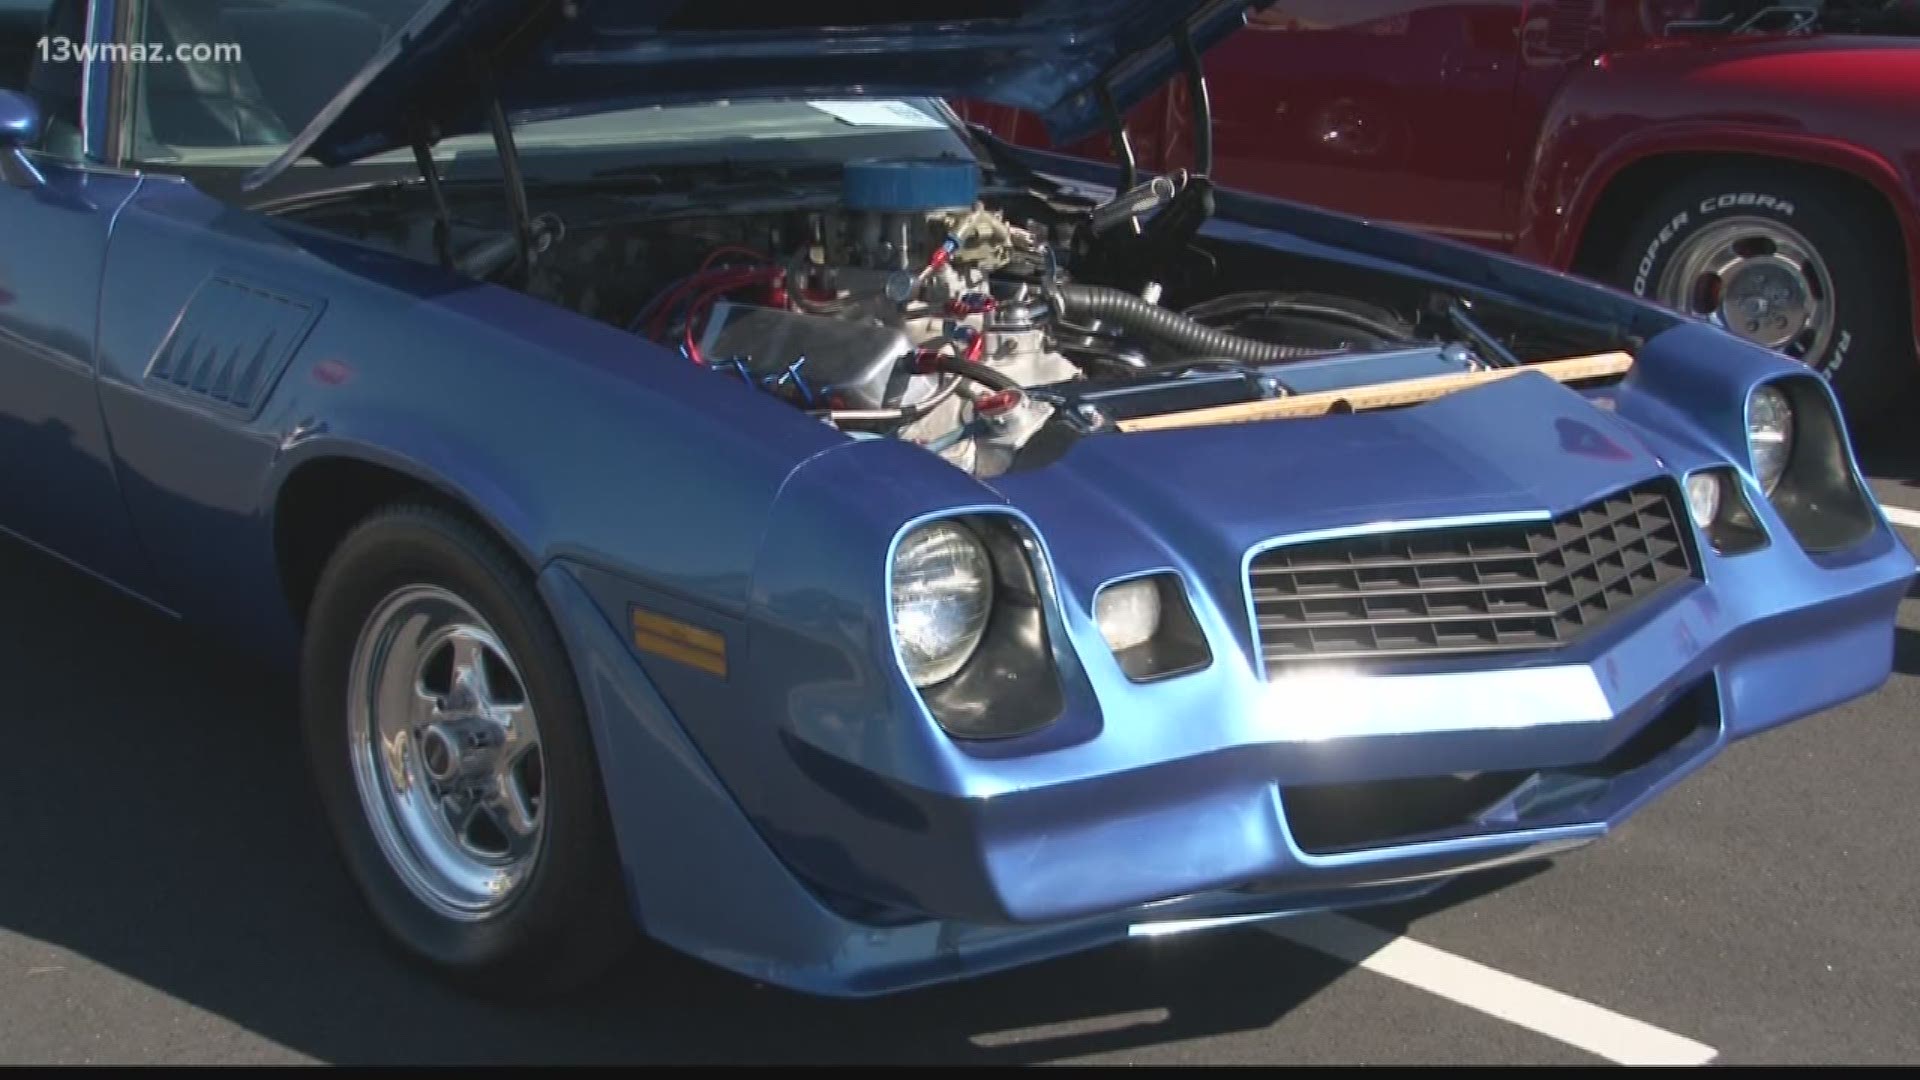 The car show was held Saturday. Organizer Cynthia Malone says she started the event with her late husband in 2012 to get people talking about heart disease.